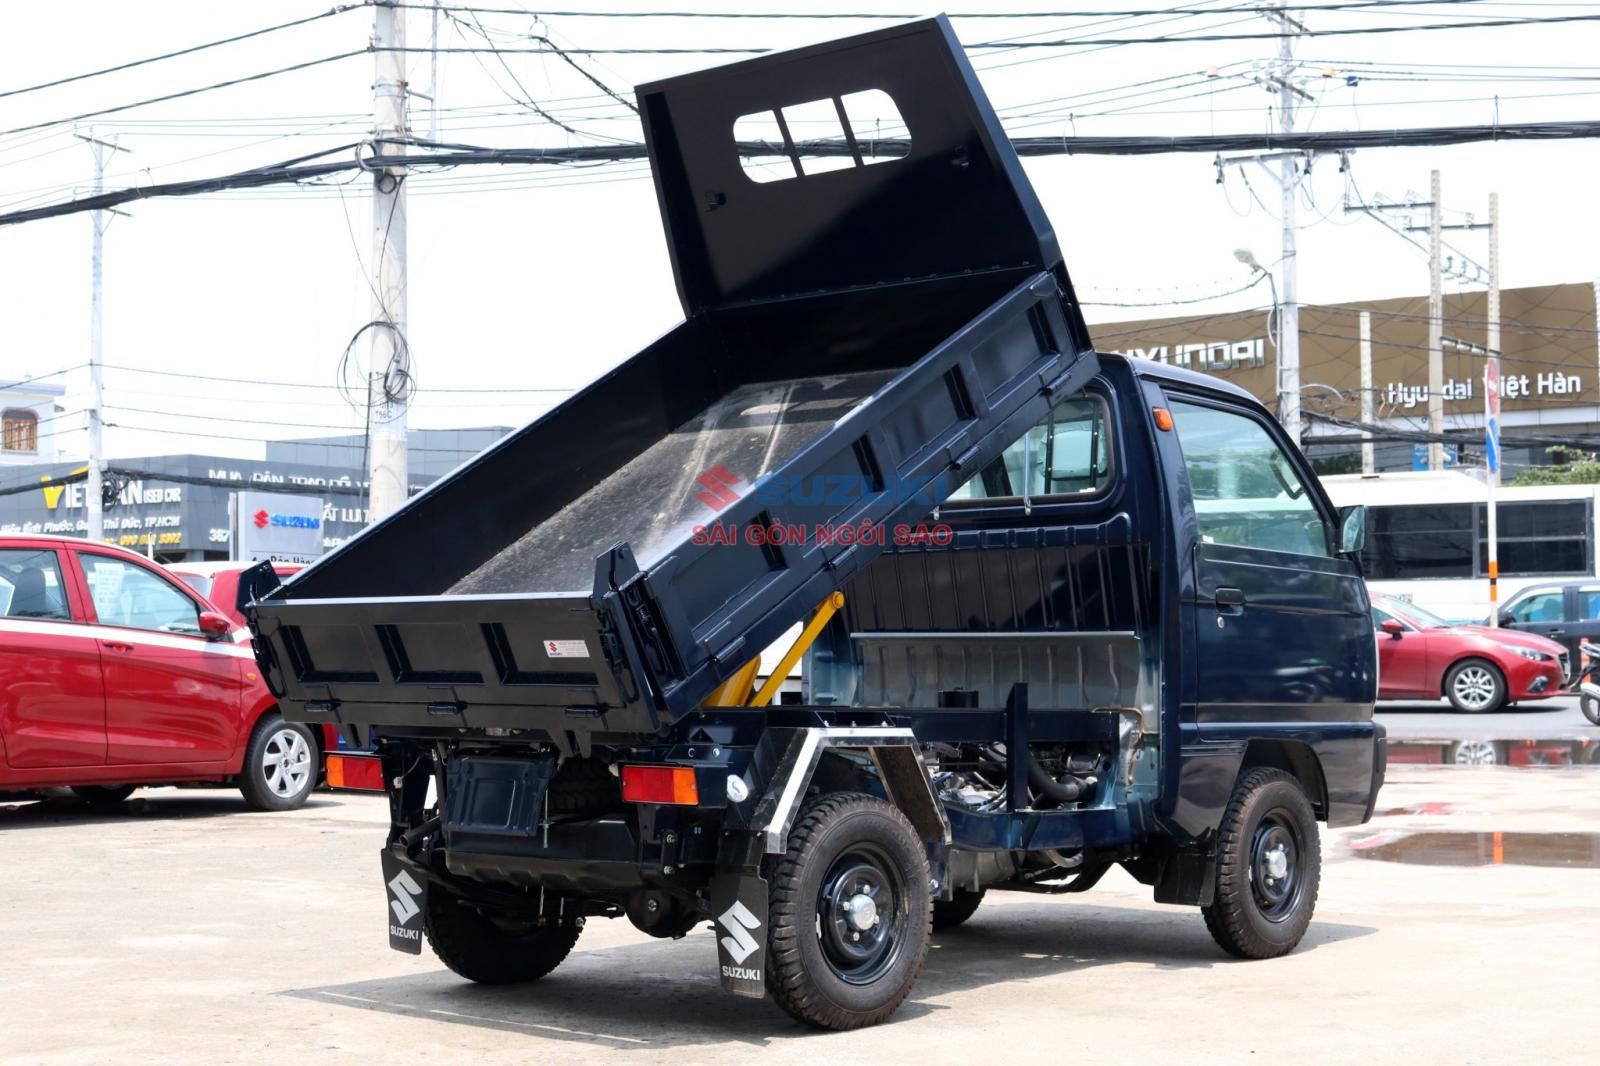 Suzuki Super Carry Truck 2019 - Bán nhanh chiếc xe Suzuki Super Carry Truck 500kg, sản xuất 2019, màu xanh lam, hỗ trợ giao nhanh